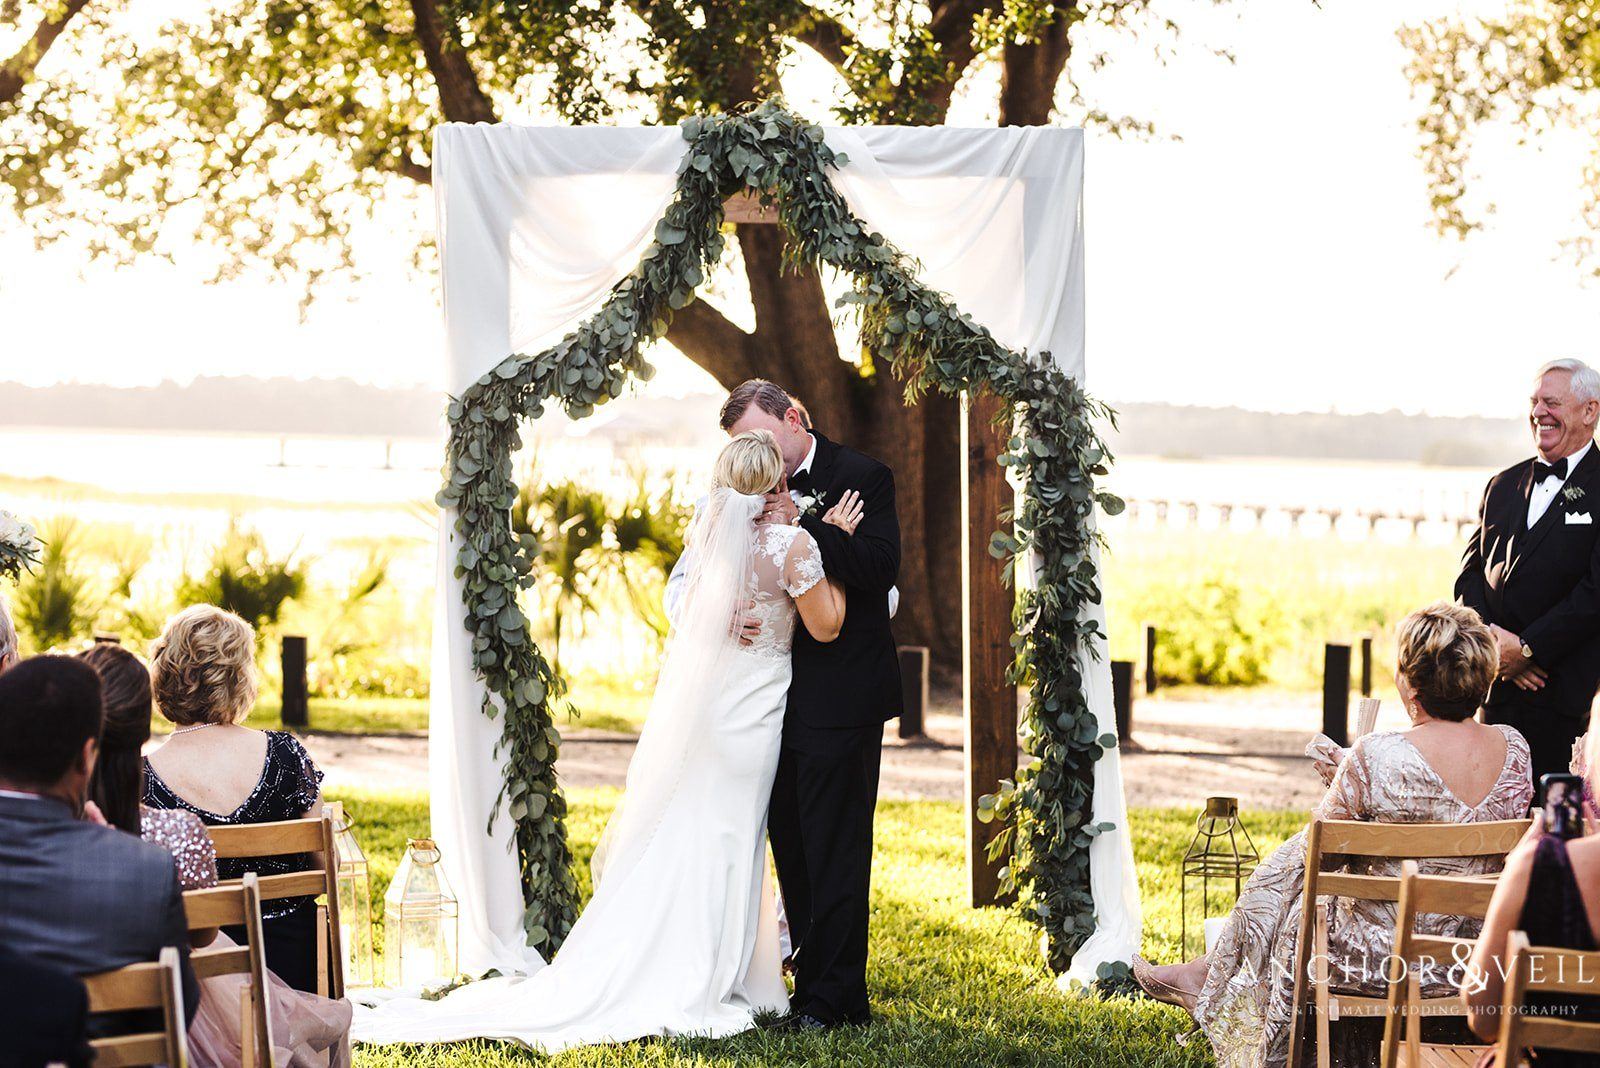 You may kiss your bride at the Lowndes Grove Plantation Wedding